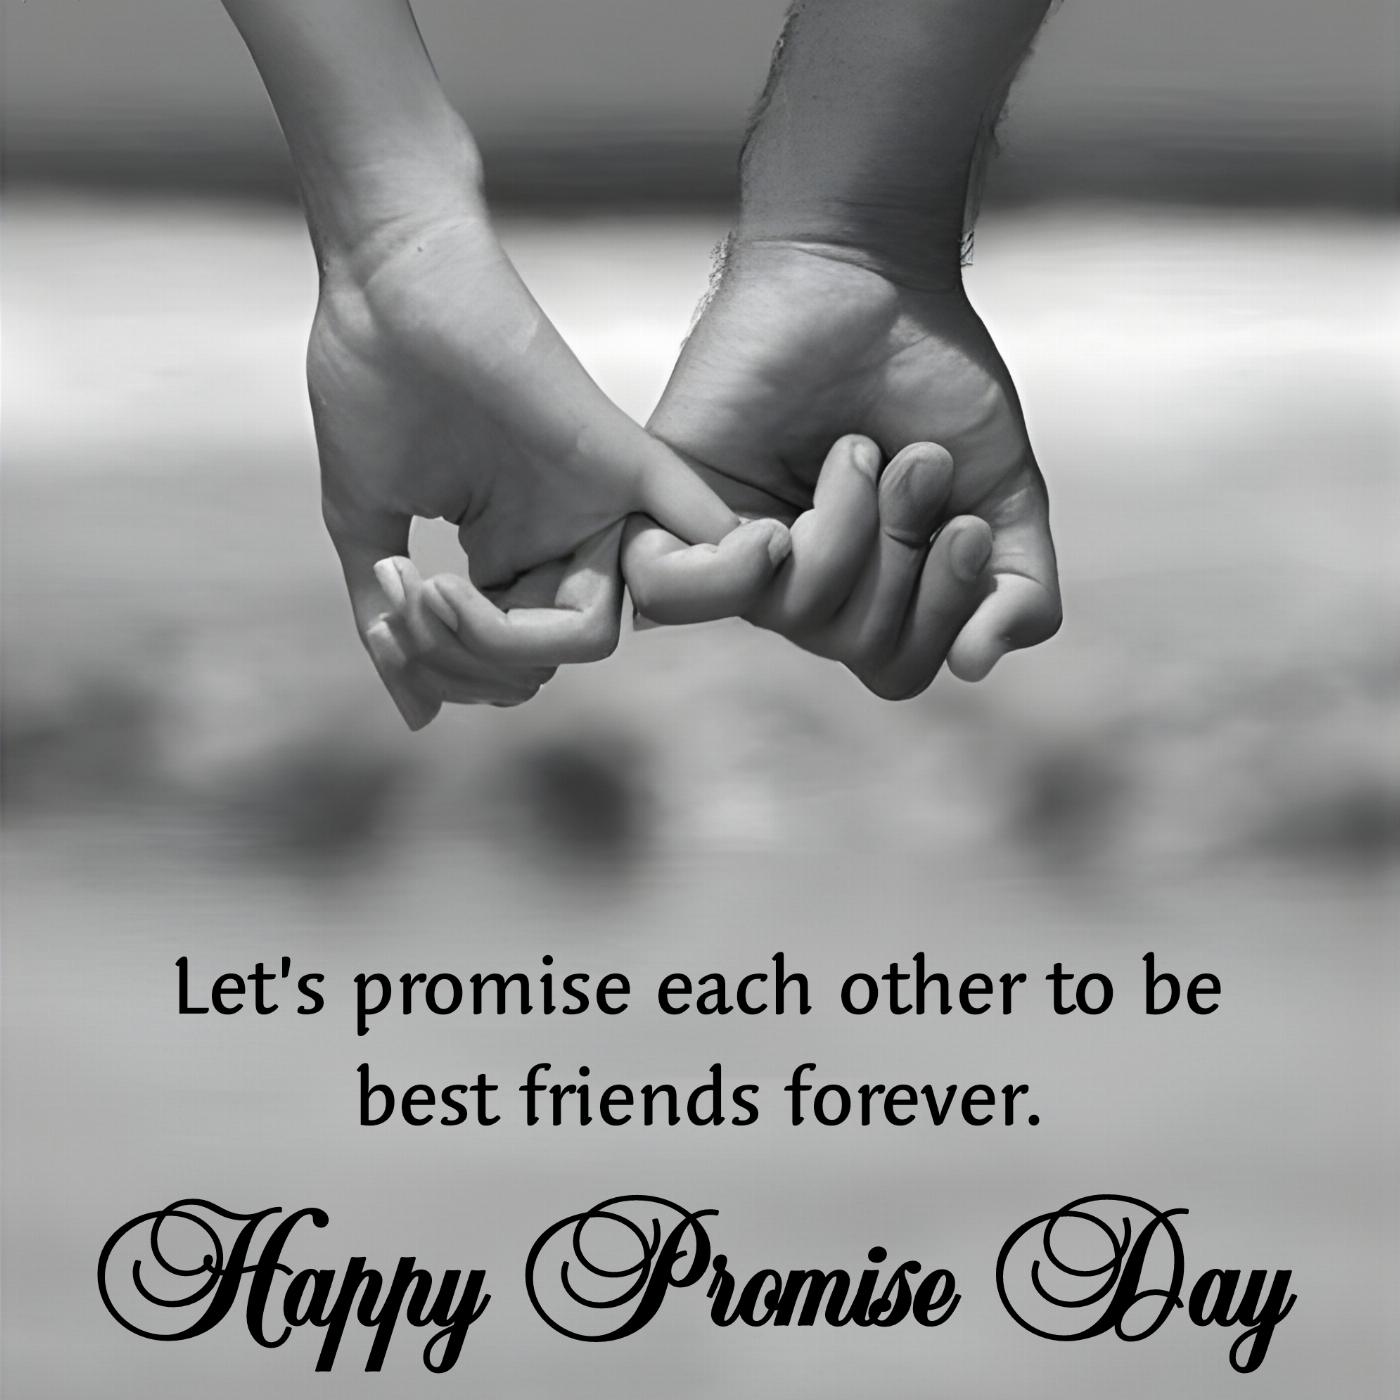 Lets promise each other to be best friends forever